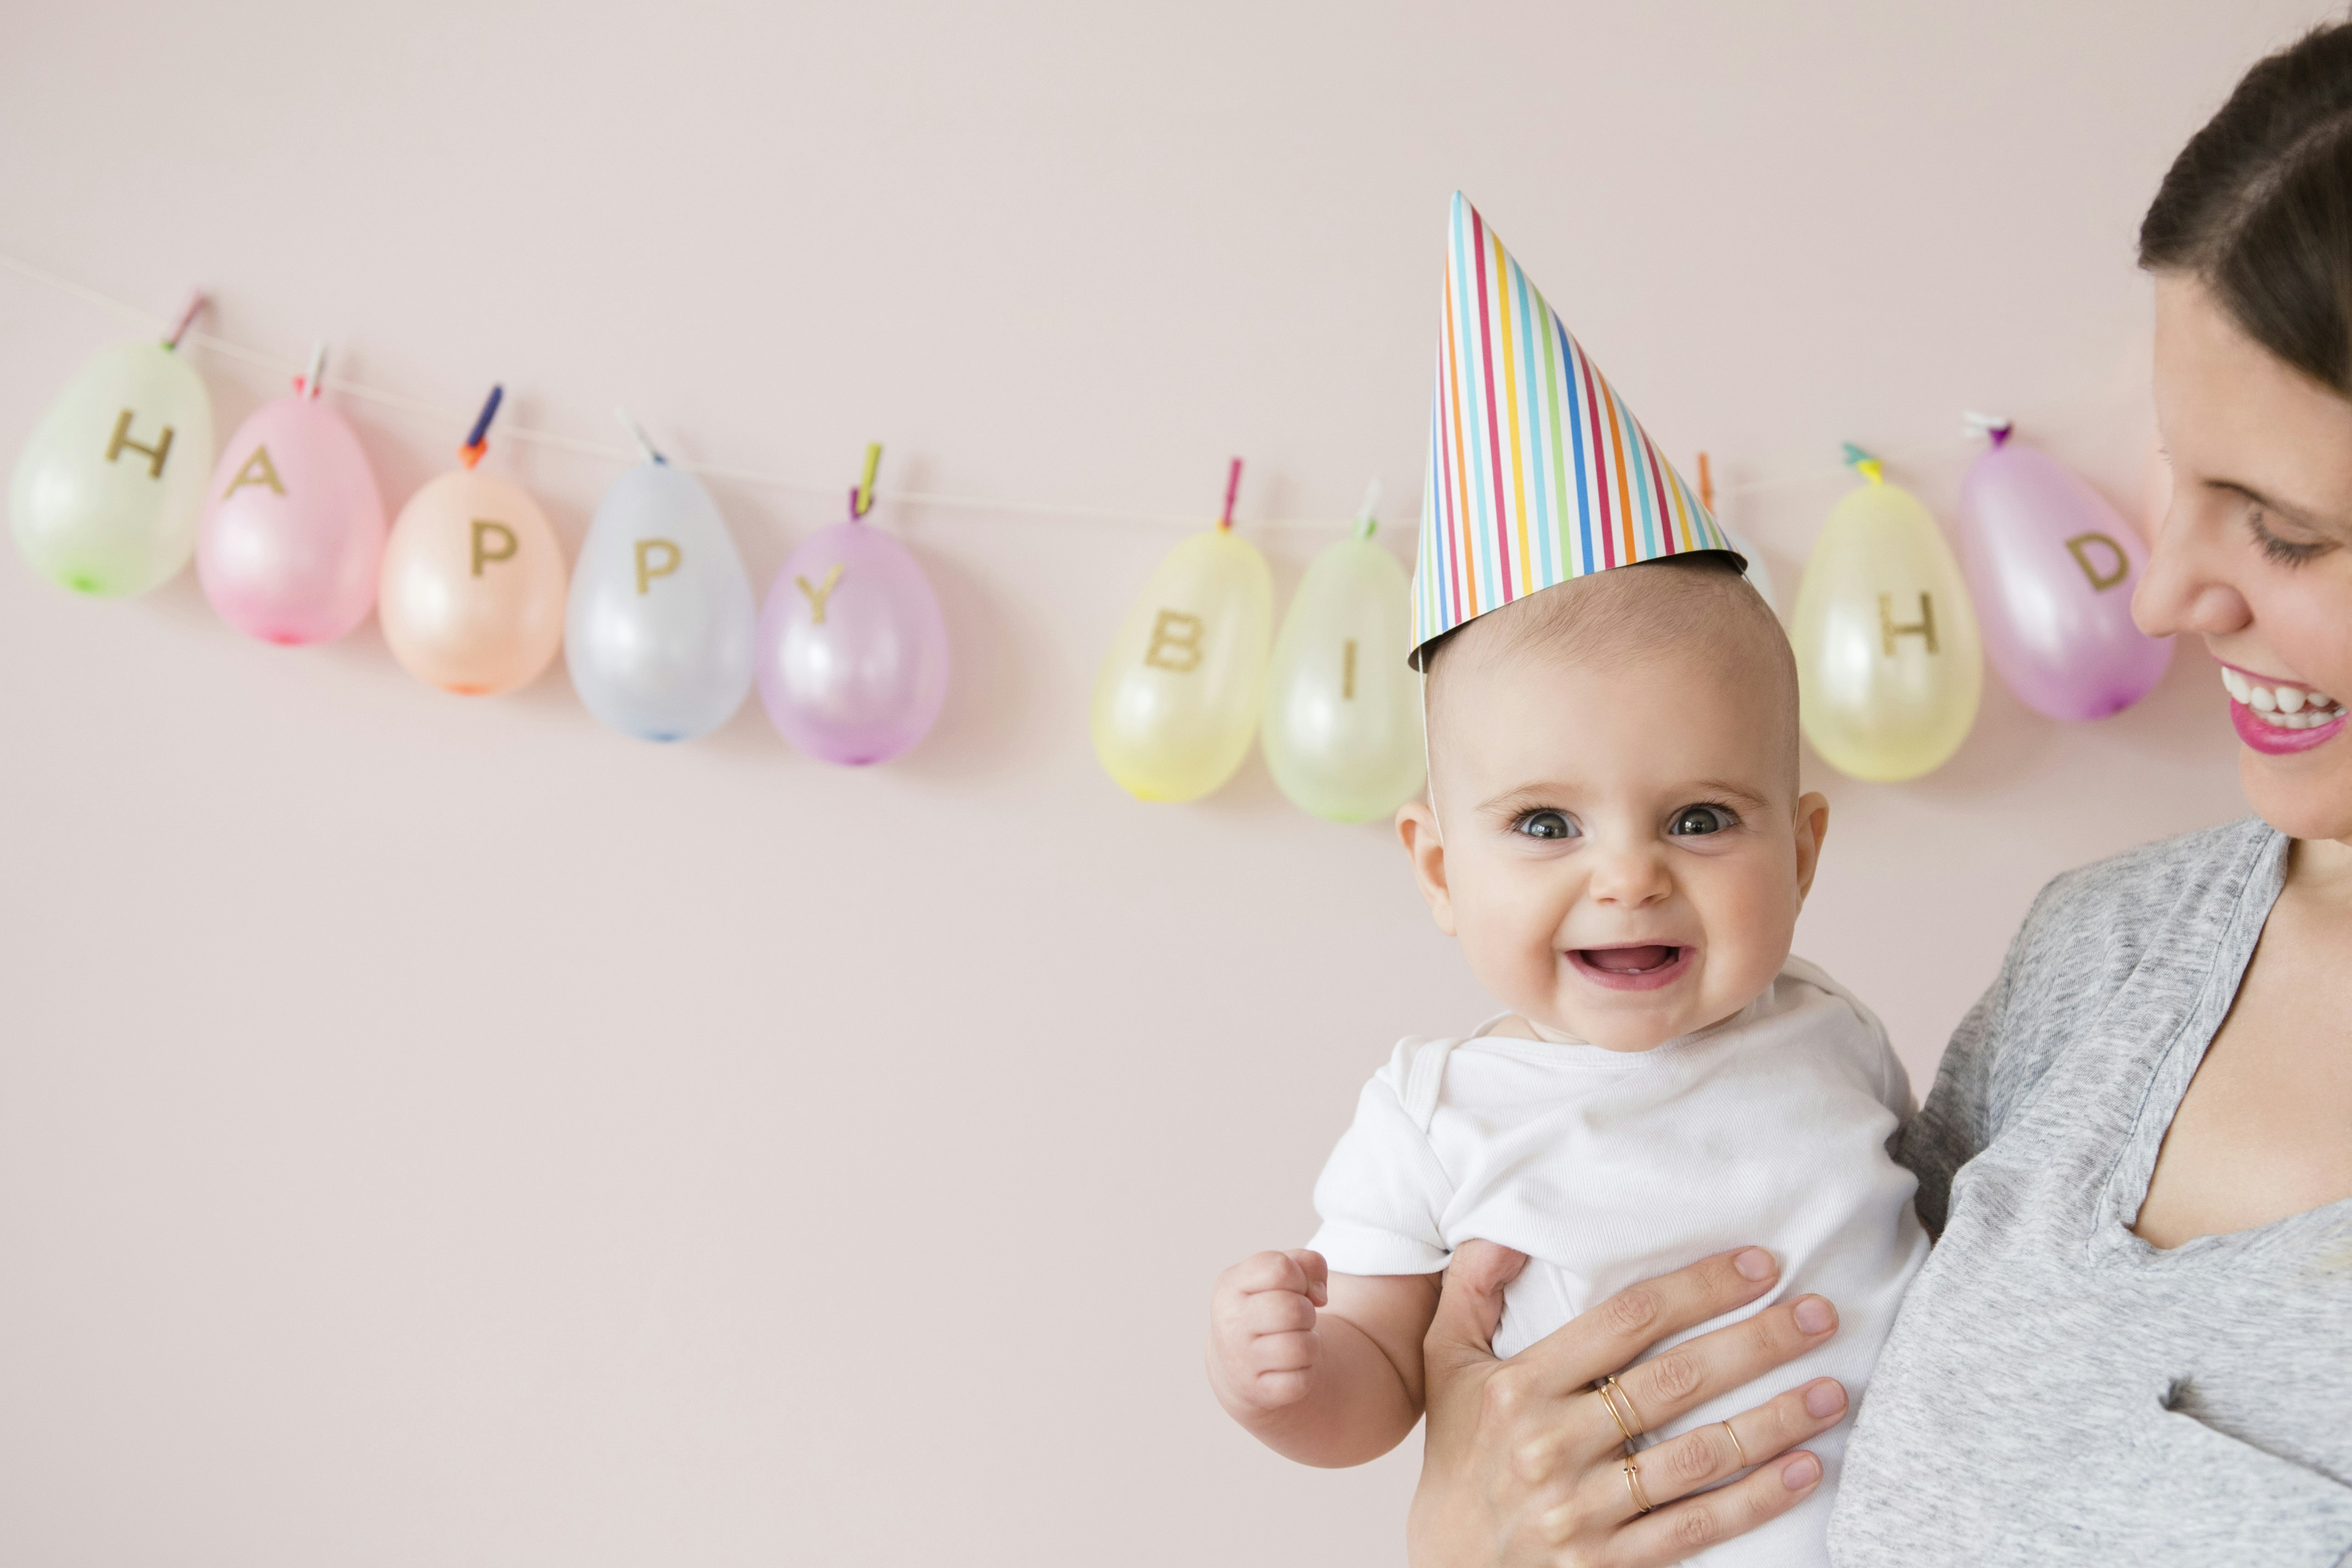 Kids Birthday Party Ideas: 16 Adorable Themes and Decorations